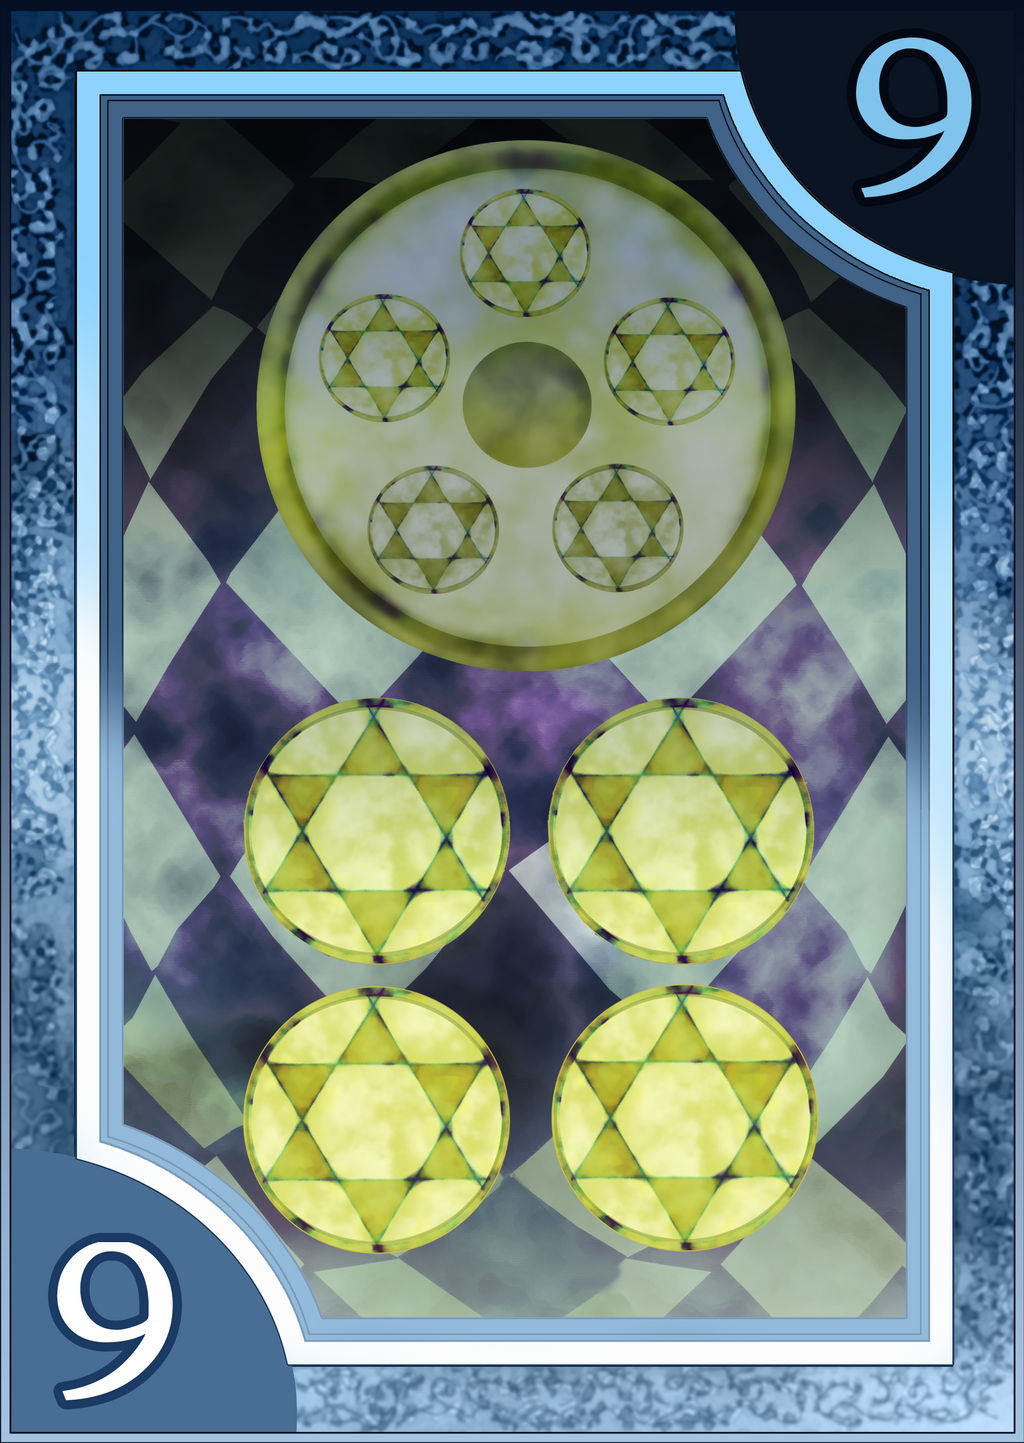 Persona 3/4 Tarot Card Deck HR - Suit of Coins 9 by Enetirnel on DeviantArt